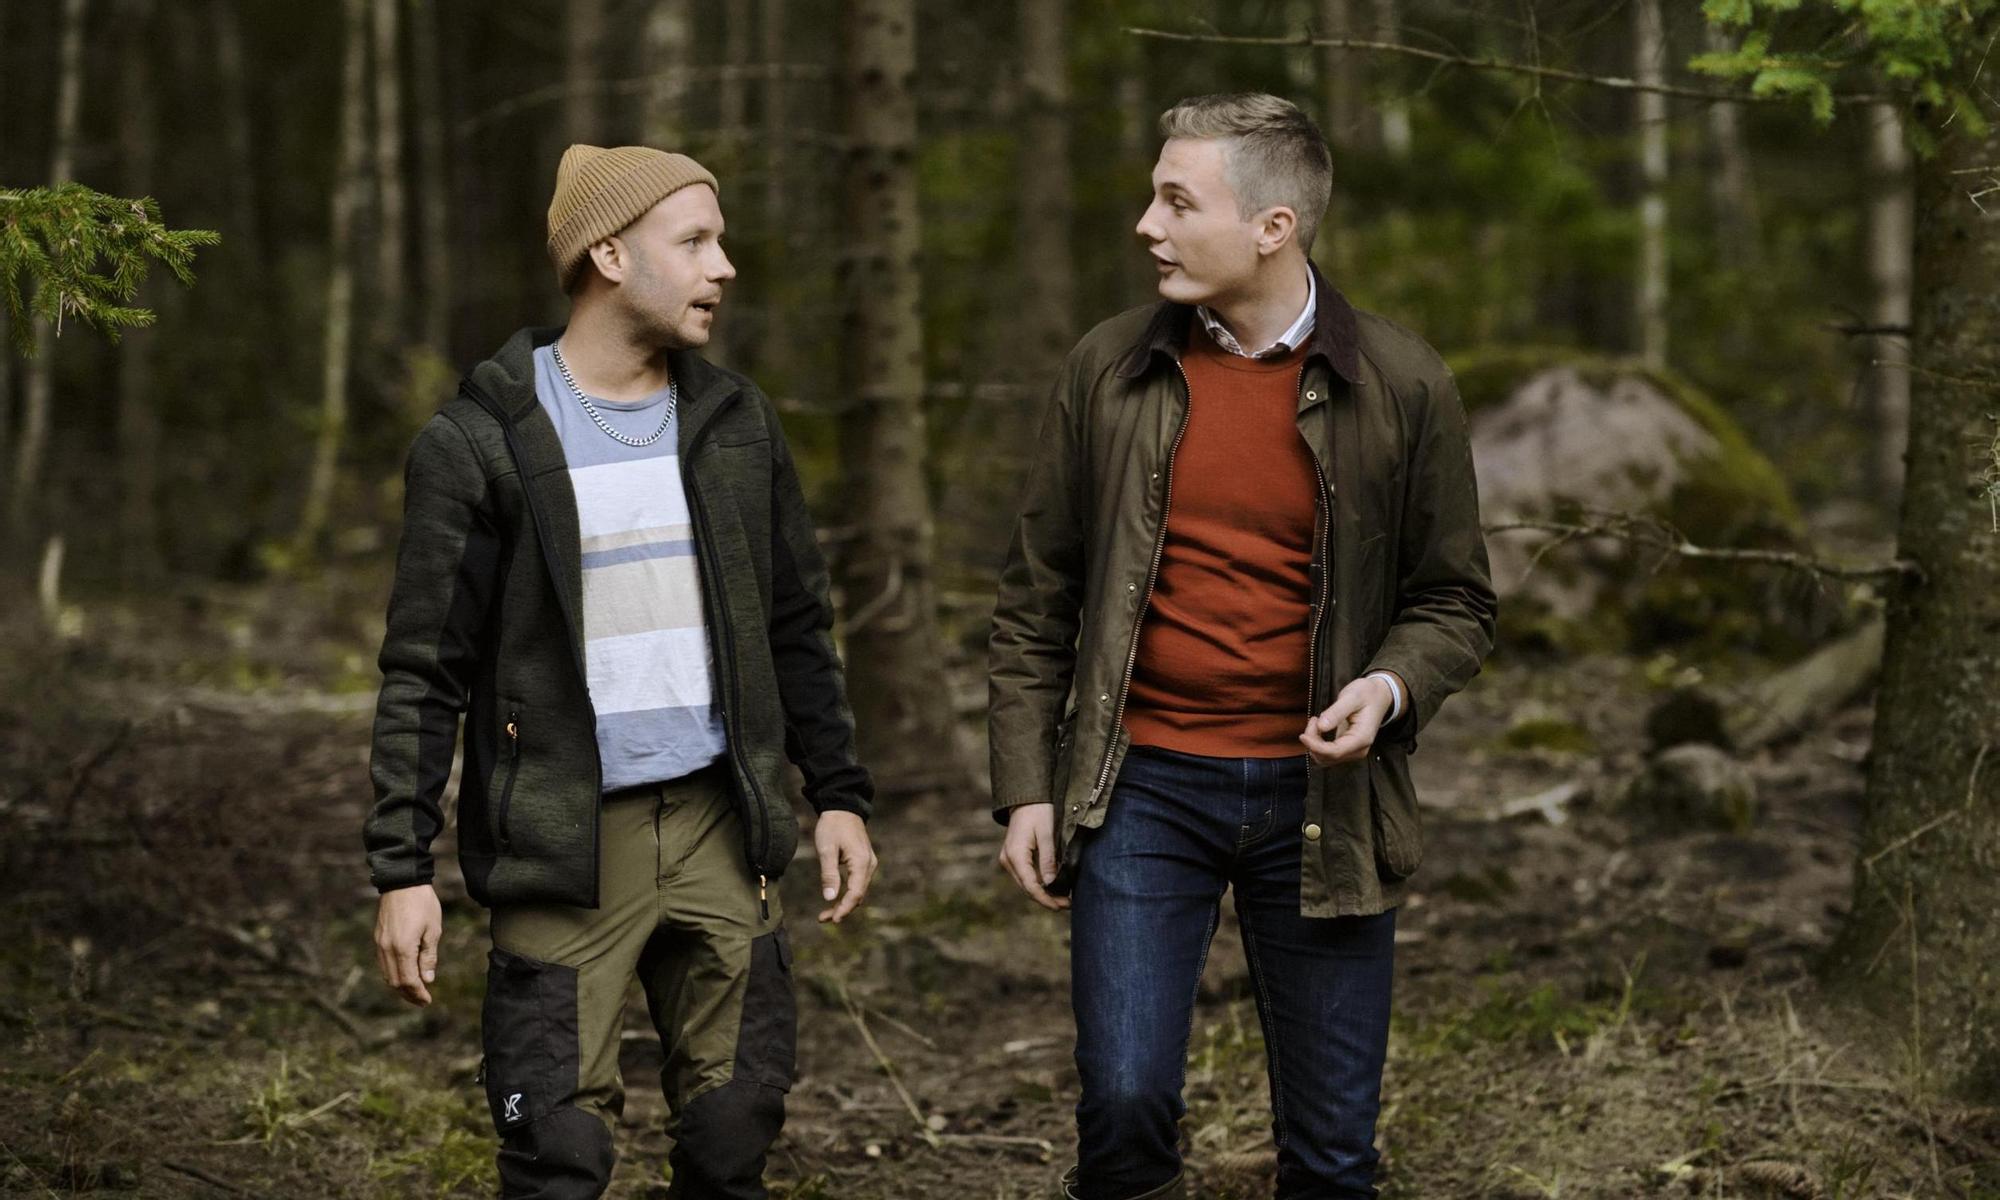 Two men meeting in the forest